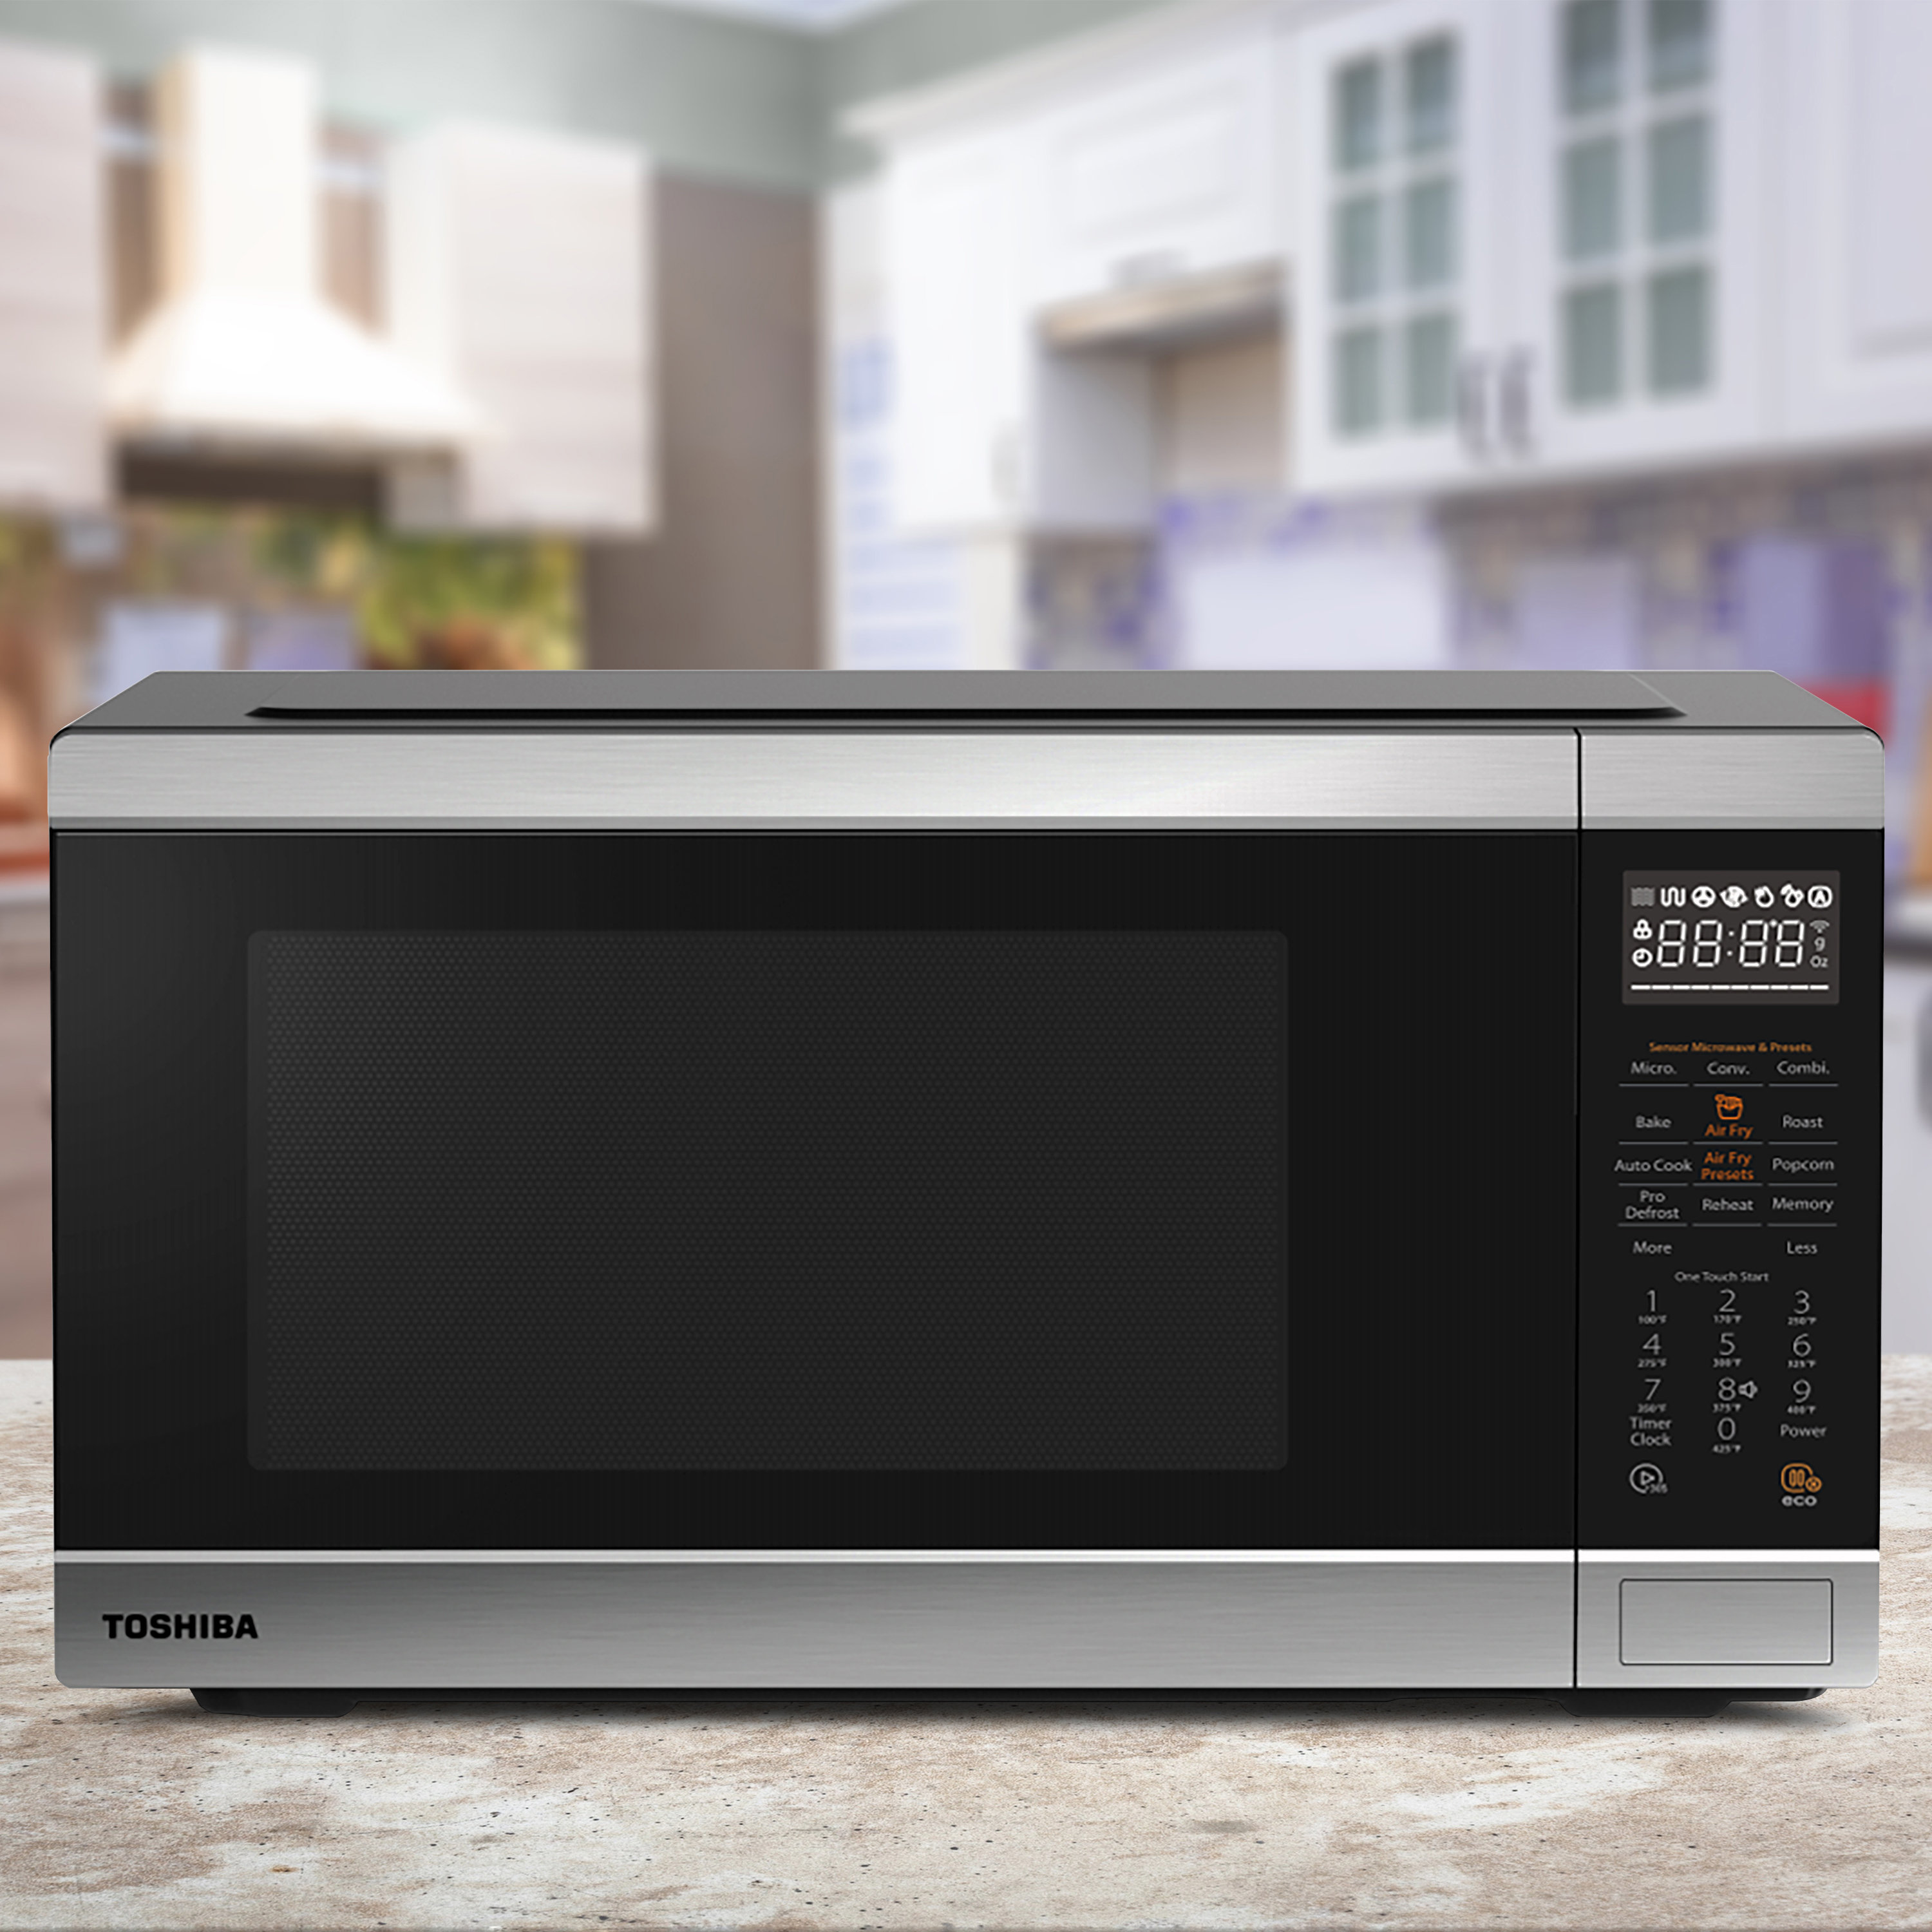 Danby 5 in 1 Multifunctional Microwave Oven with Air Fry